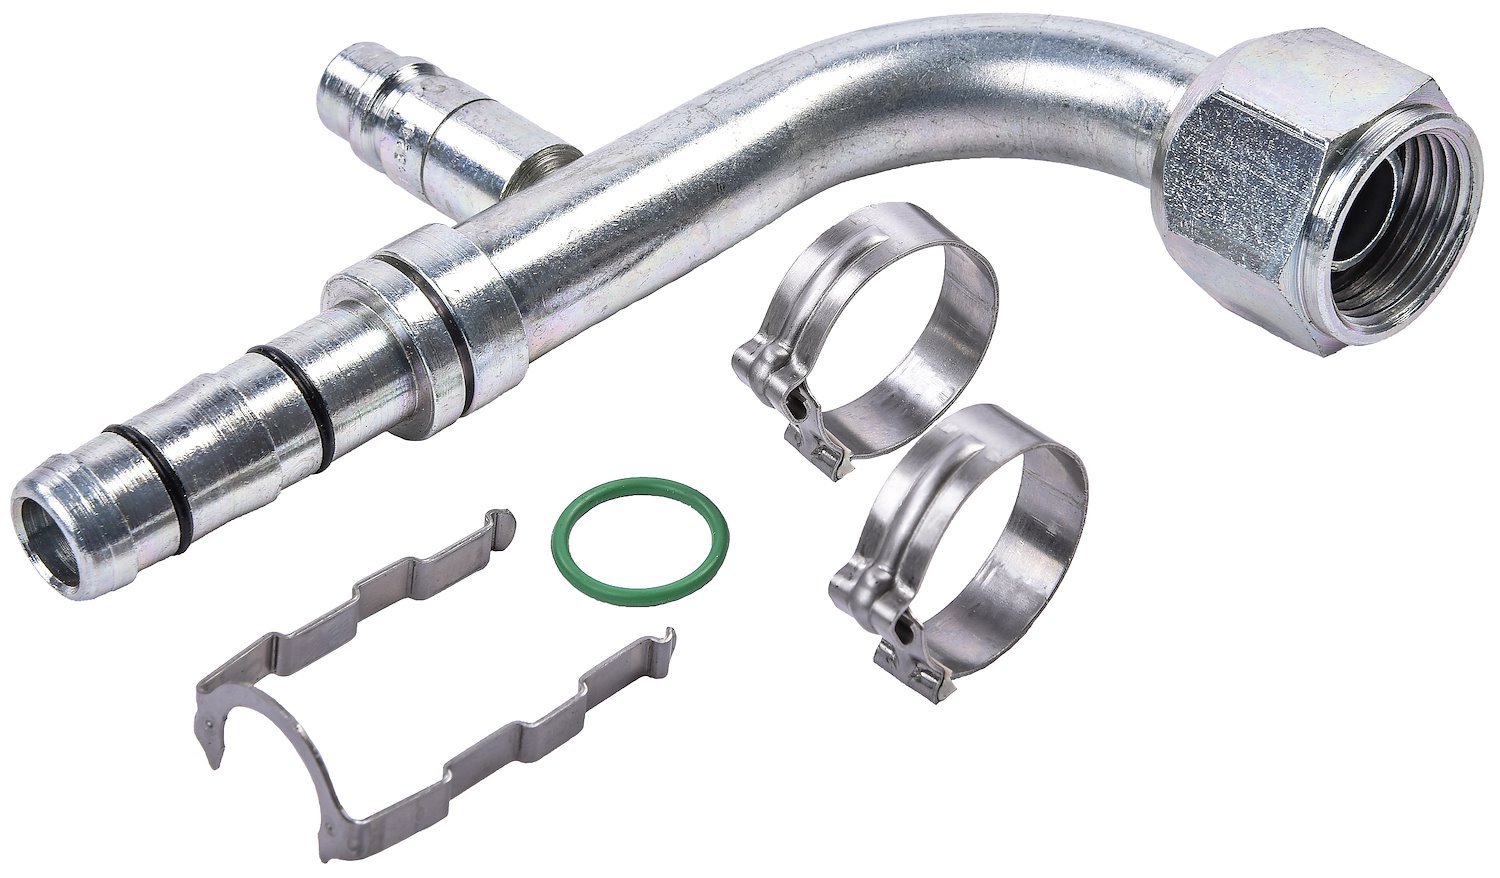 EZ Clip A/C Hose End Fitting Kit with R134a Port [-10 Hose Fitting, 90 degree]